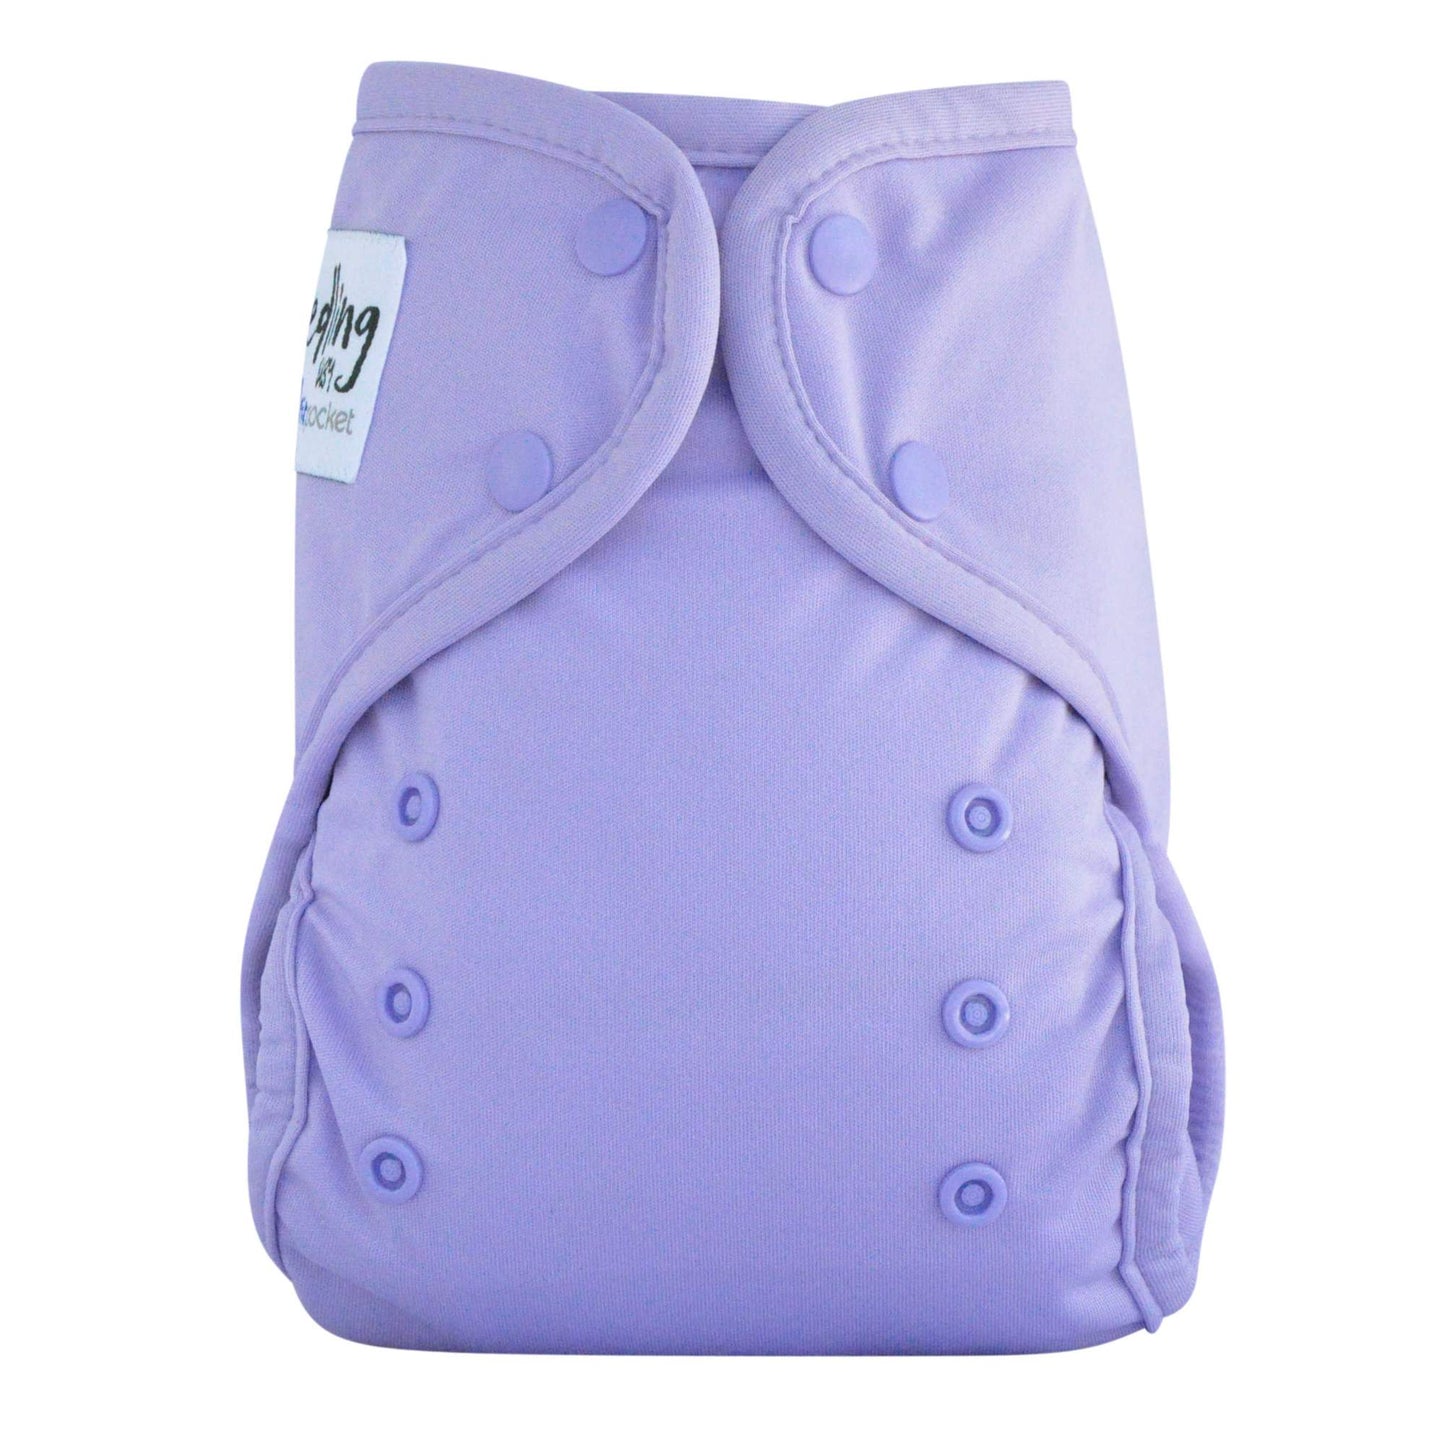 seedling baby multifit pocket nappy reusable cloth nappy